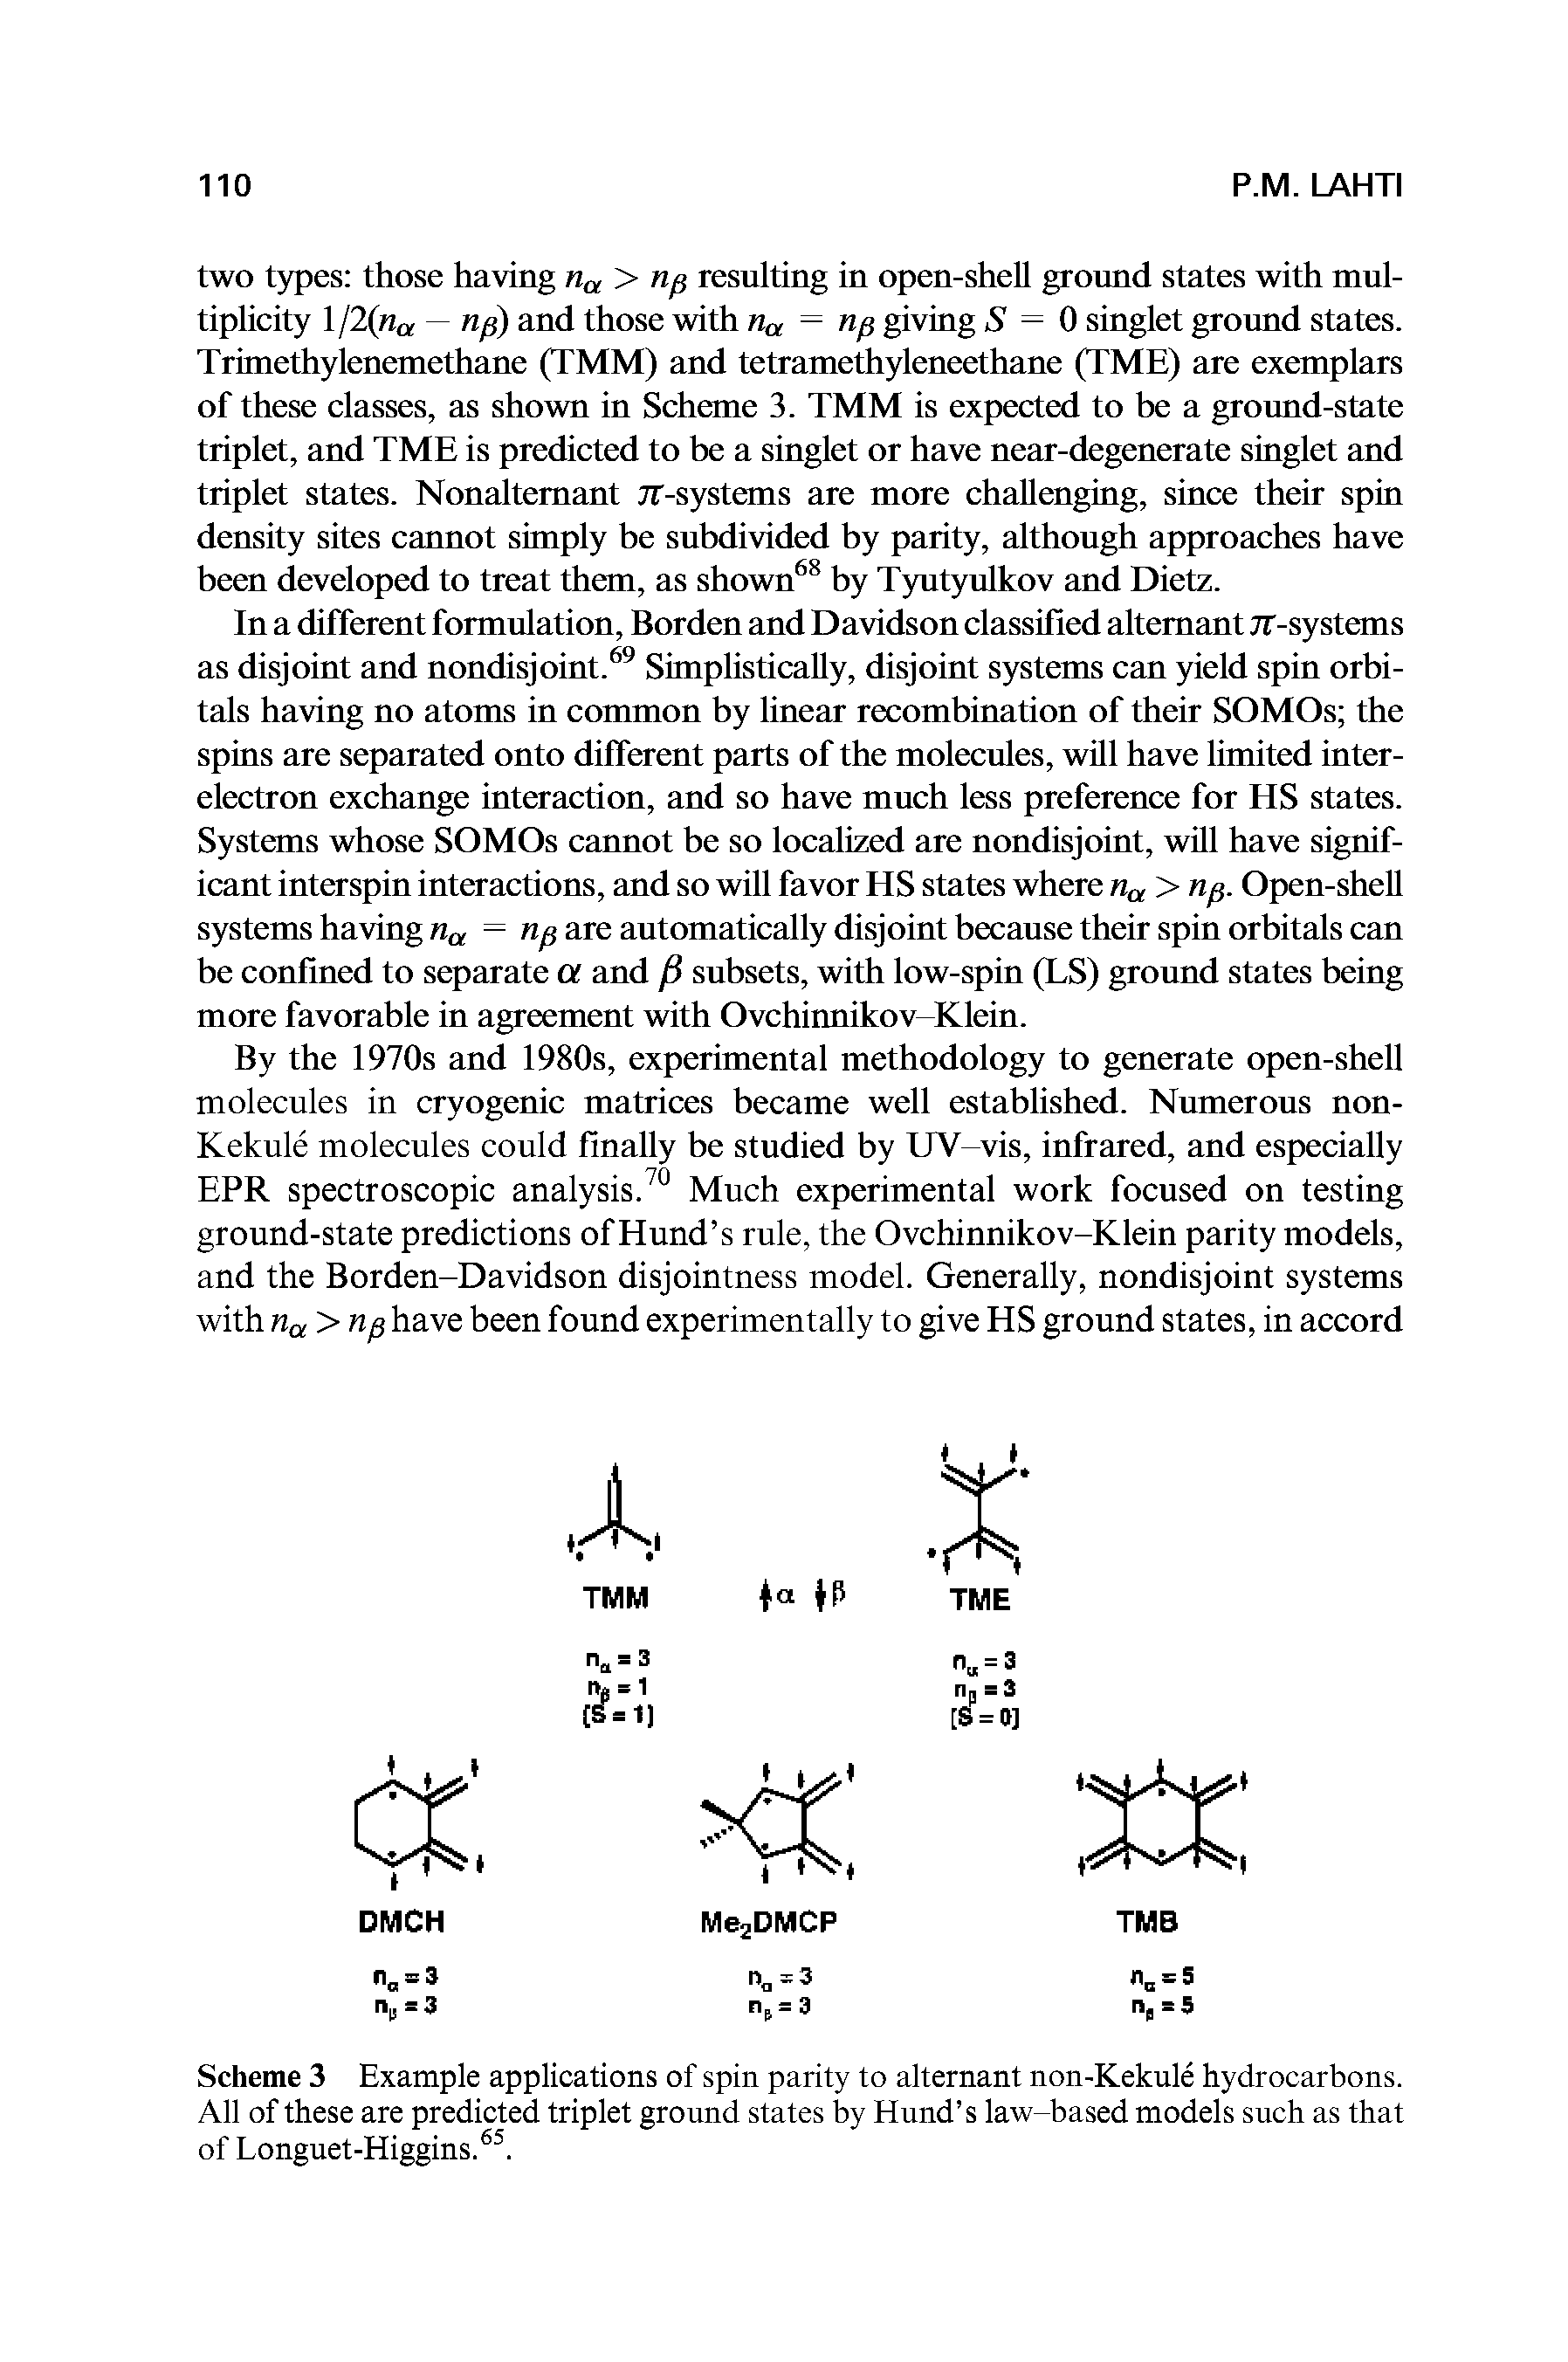 Scheme 3 Example applications of spin parity to alternant non-Kekule hydrocarbons. All of these are predicted triplet ground states by Hund s law-based models such as that of Longuet-Higgins.65.